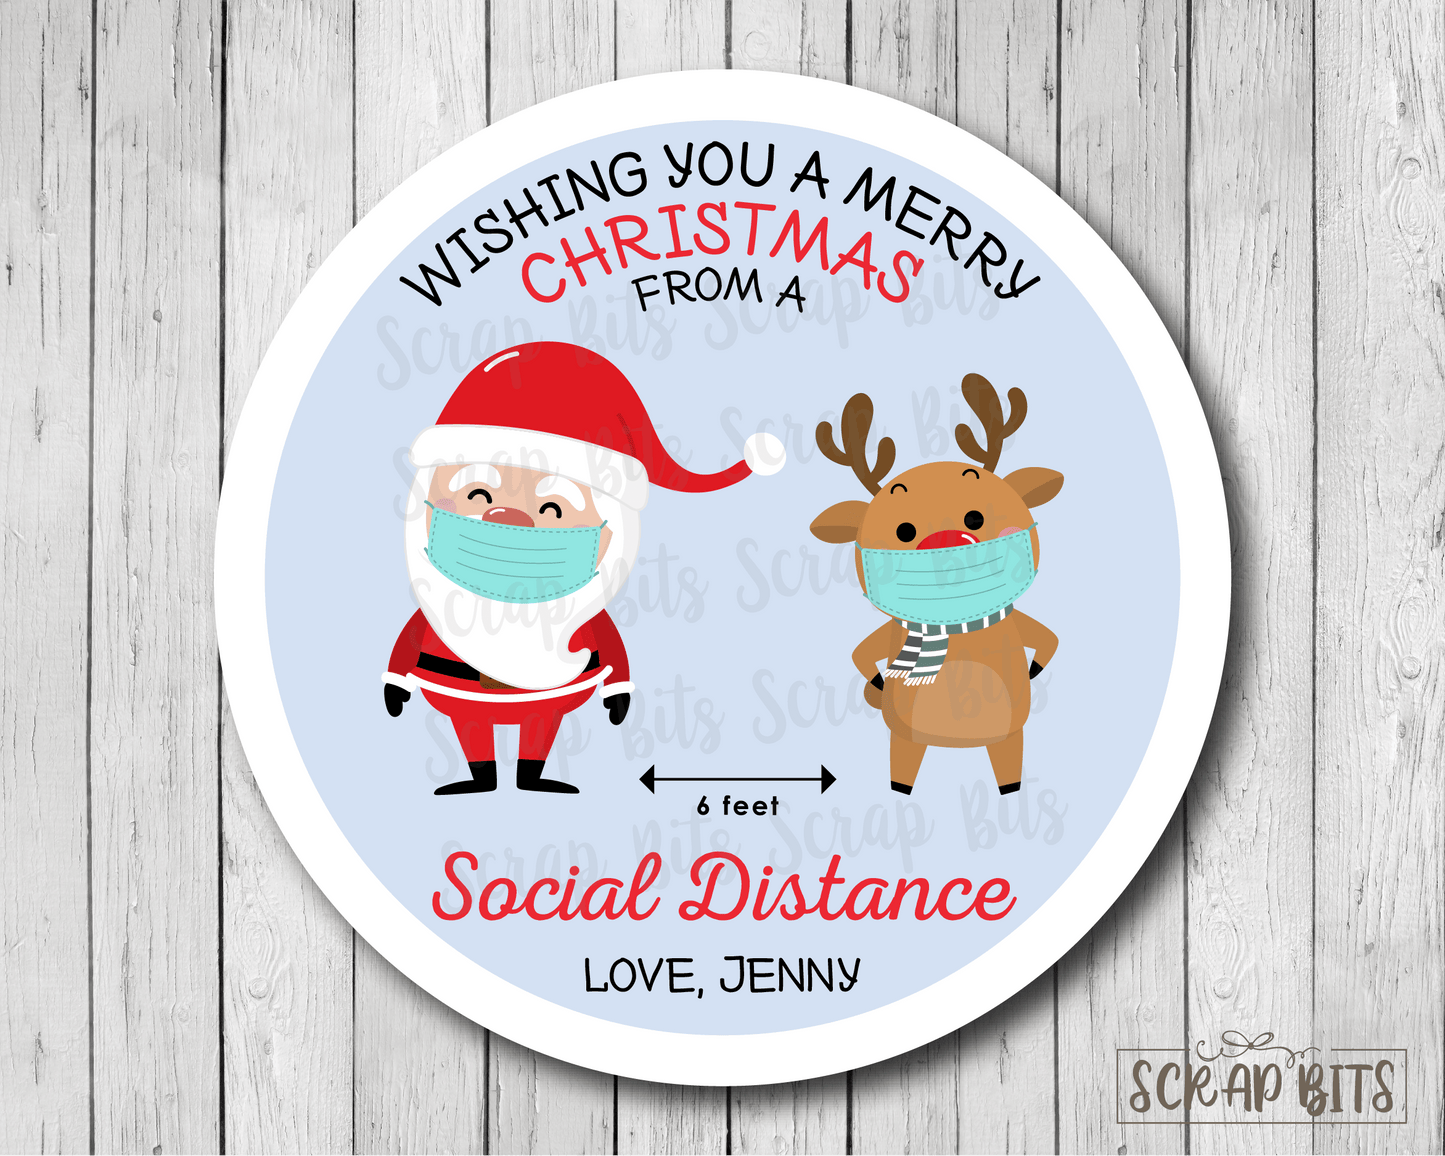 Merry Christmas From A Social Distance Stickers or Tags . Christmas Gift Labels - Scrap Bits